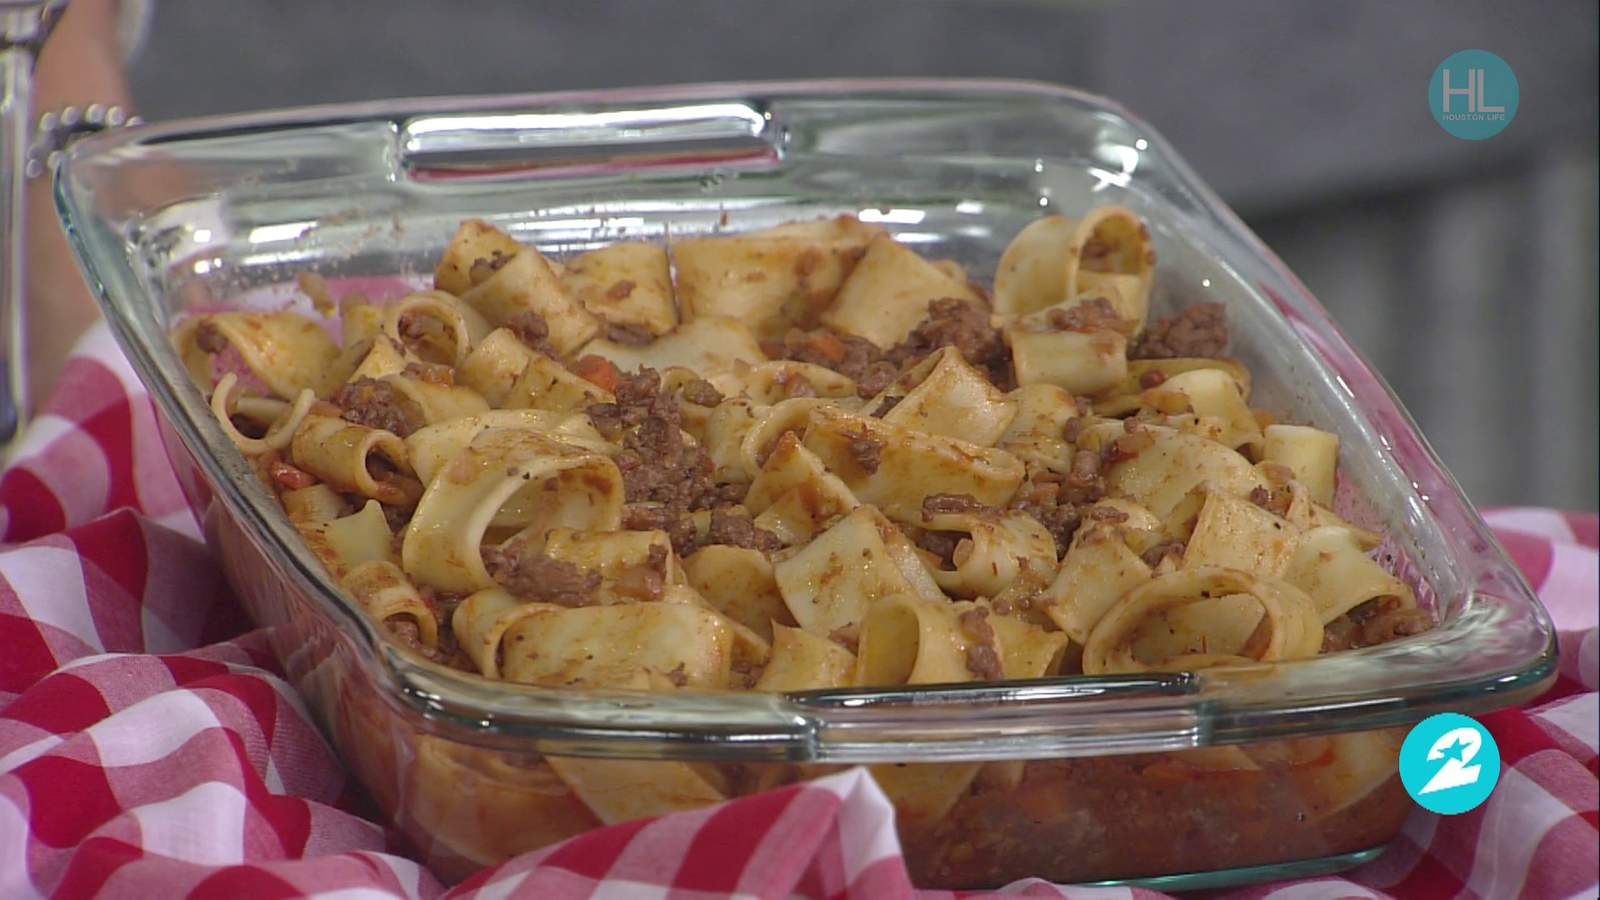 Tanji Patton of Goodtaste TV shares meal ideas for celebrating Valentine’s Day at home